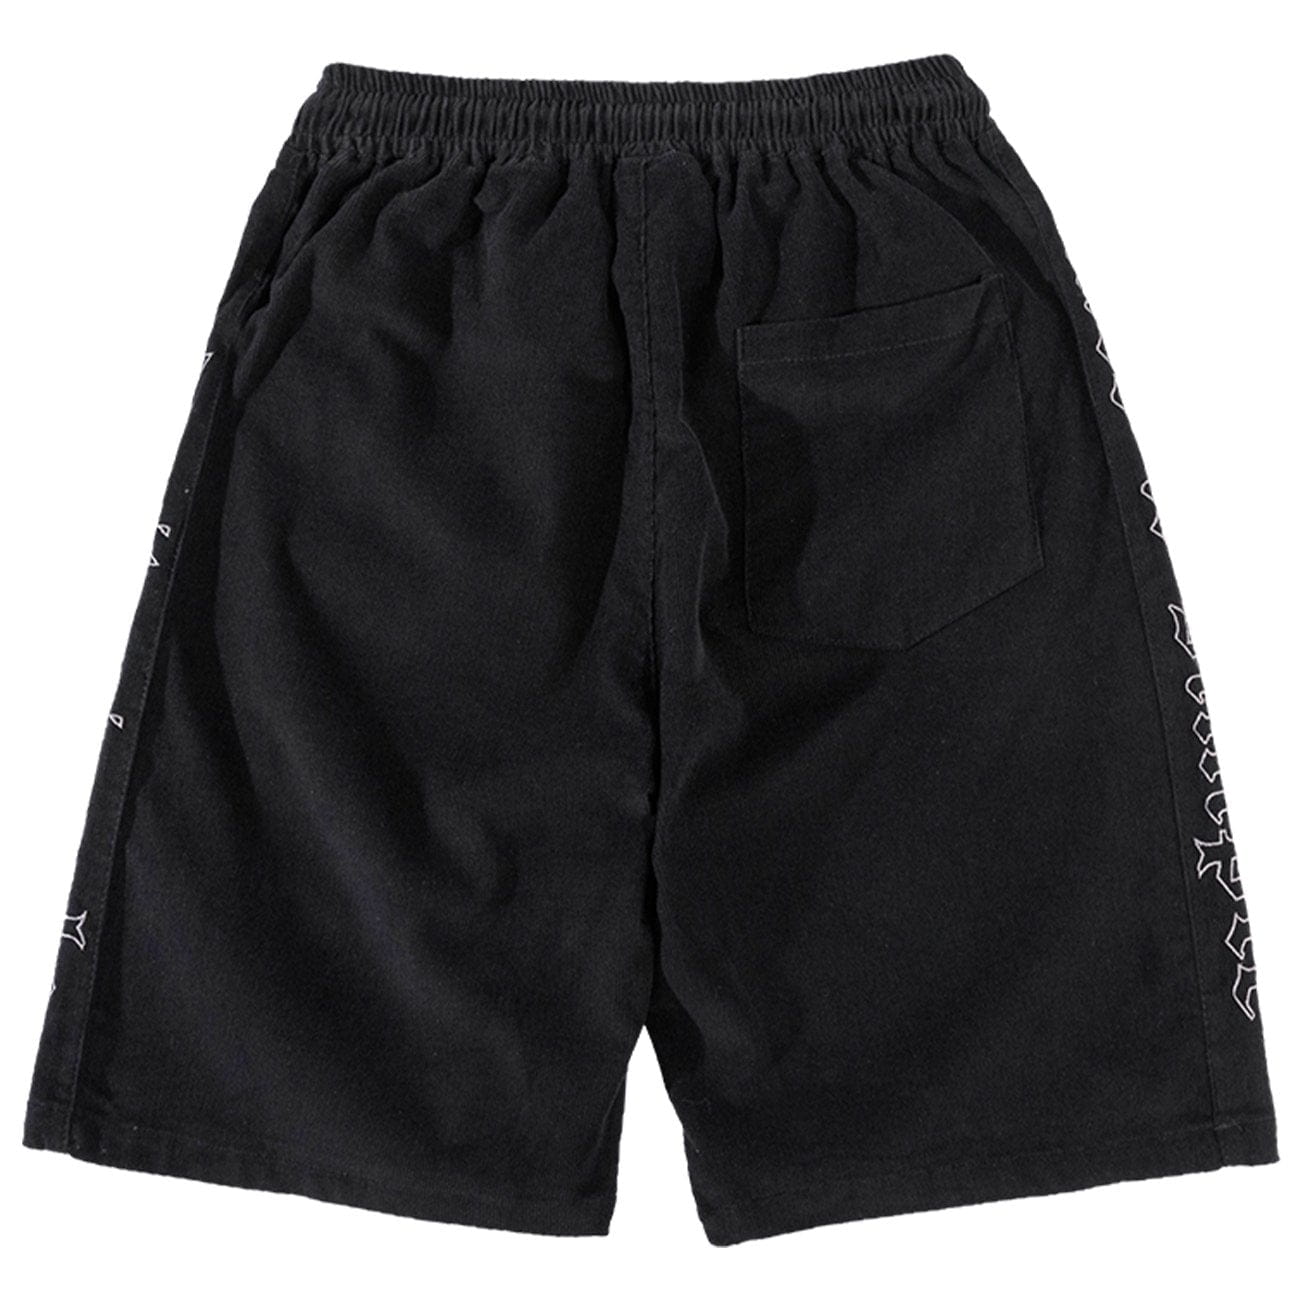 WLS Spades Embroidered Shorts